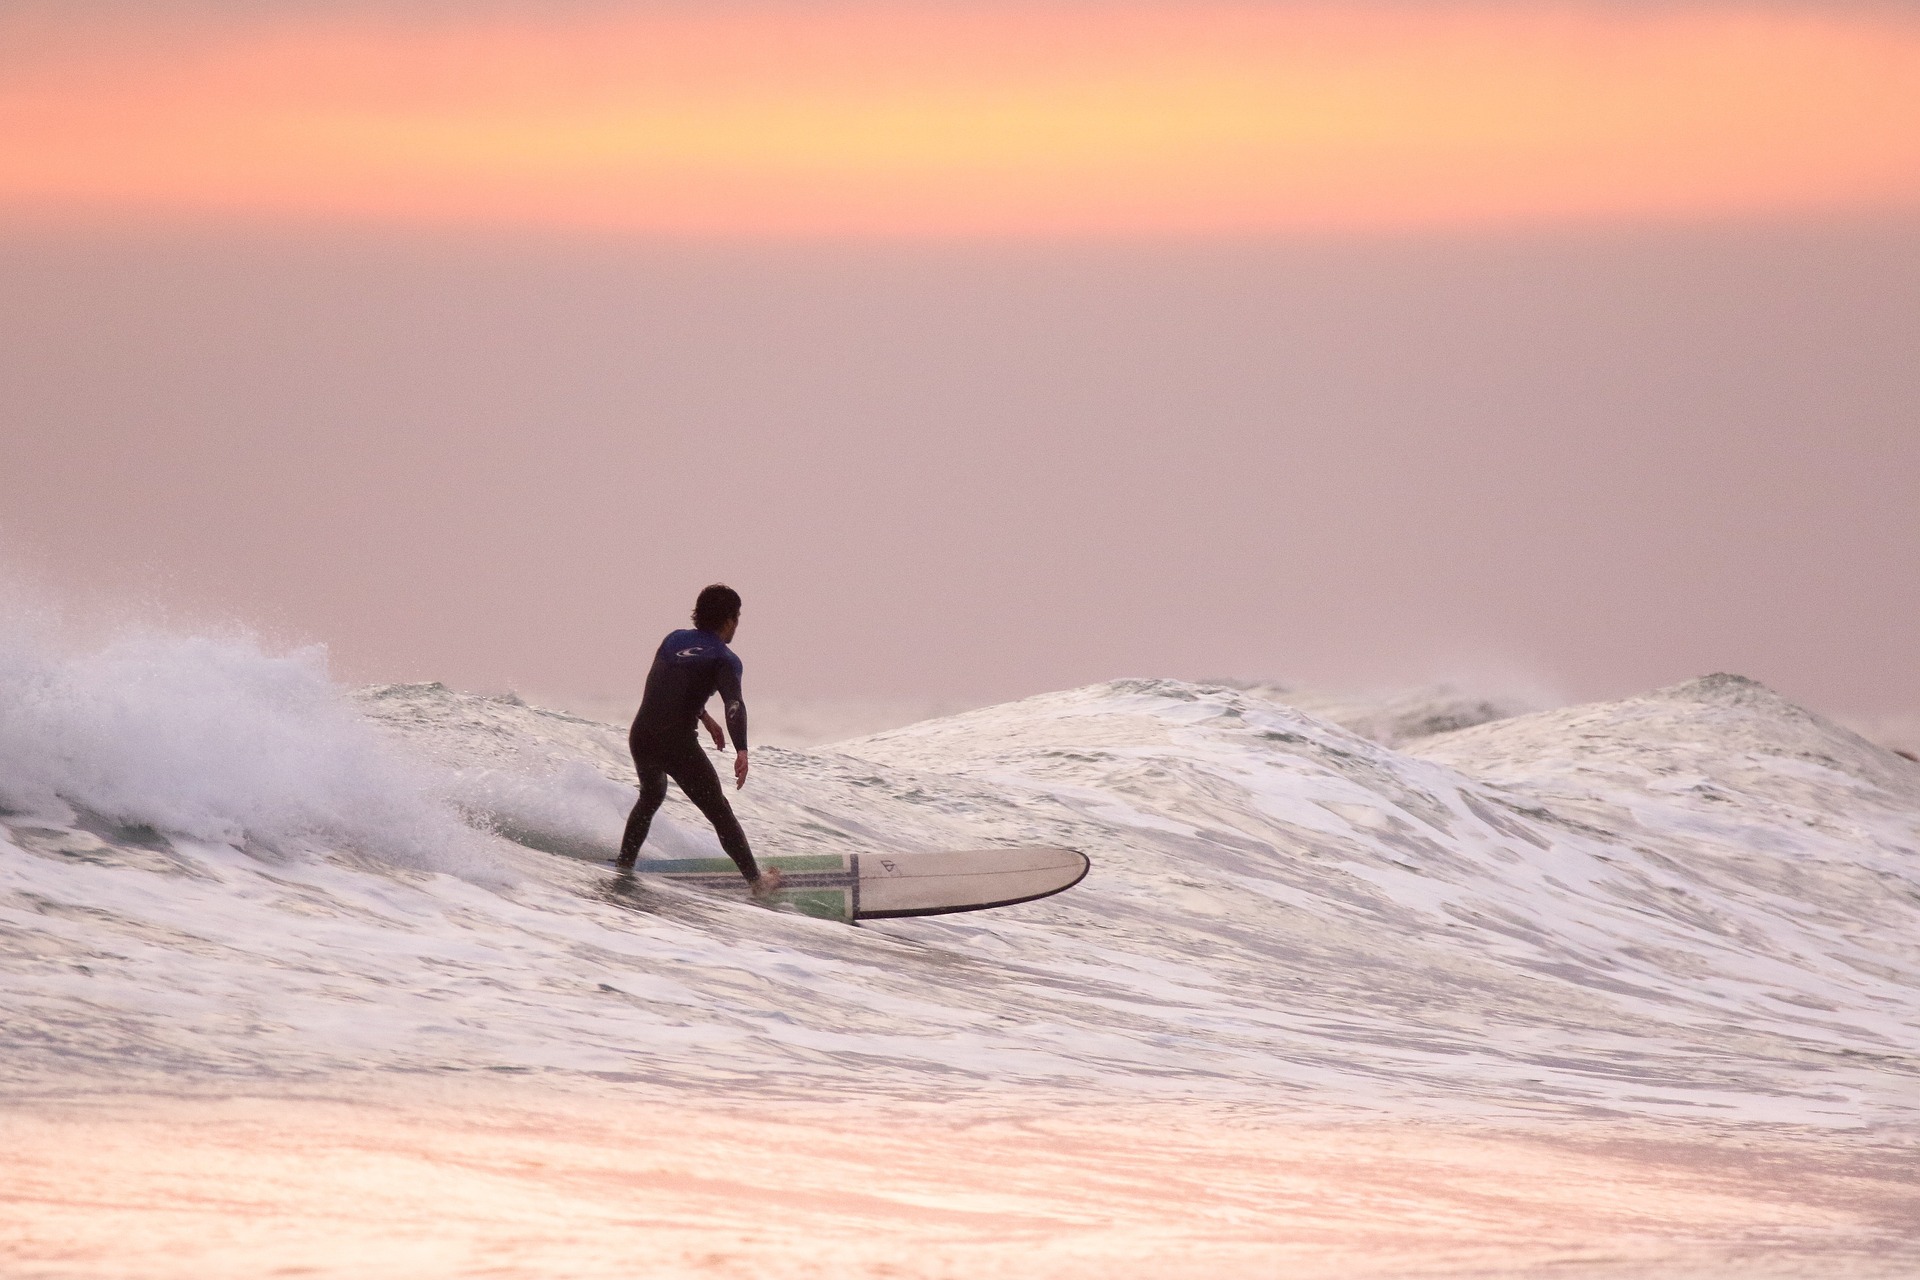 Surf Camps In Hawaii - Riding The Waves In Paradise